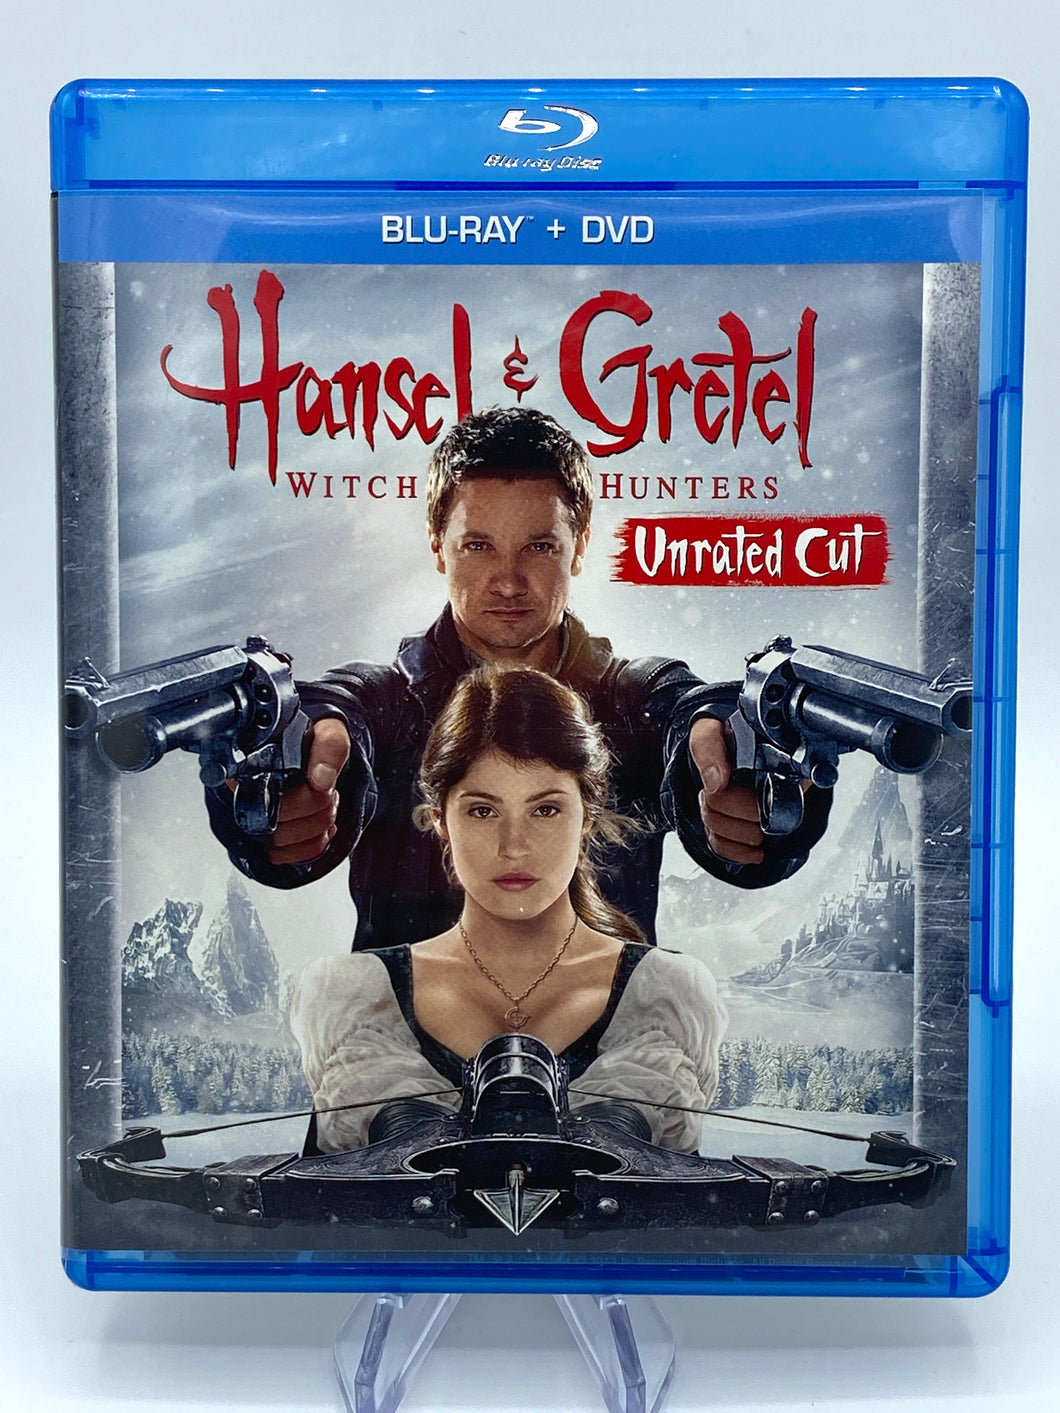 Hansel & Gretel: Witch Hunters: Unrated Cut (Blu-Ray/DVD Combo)